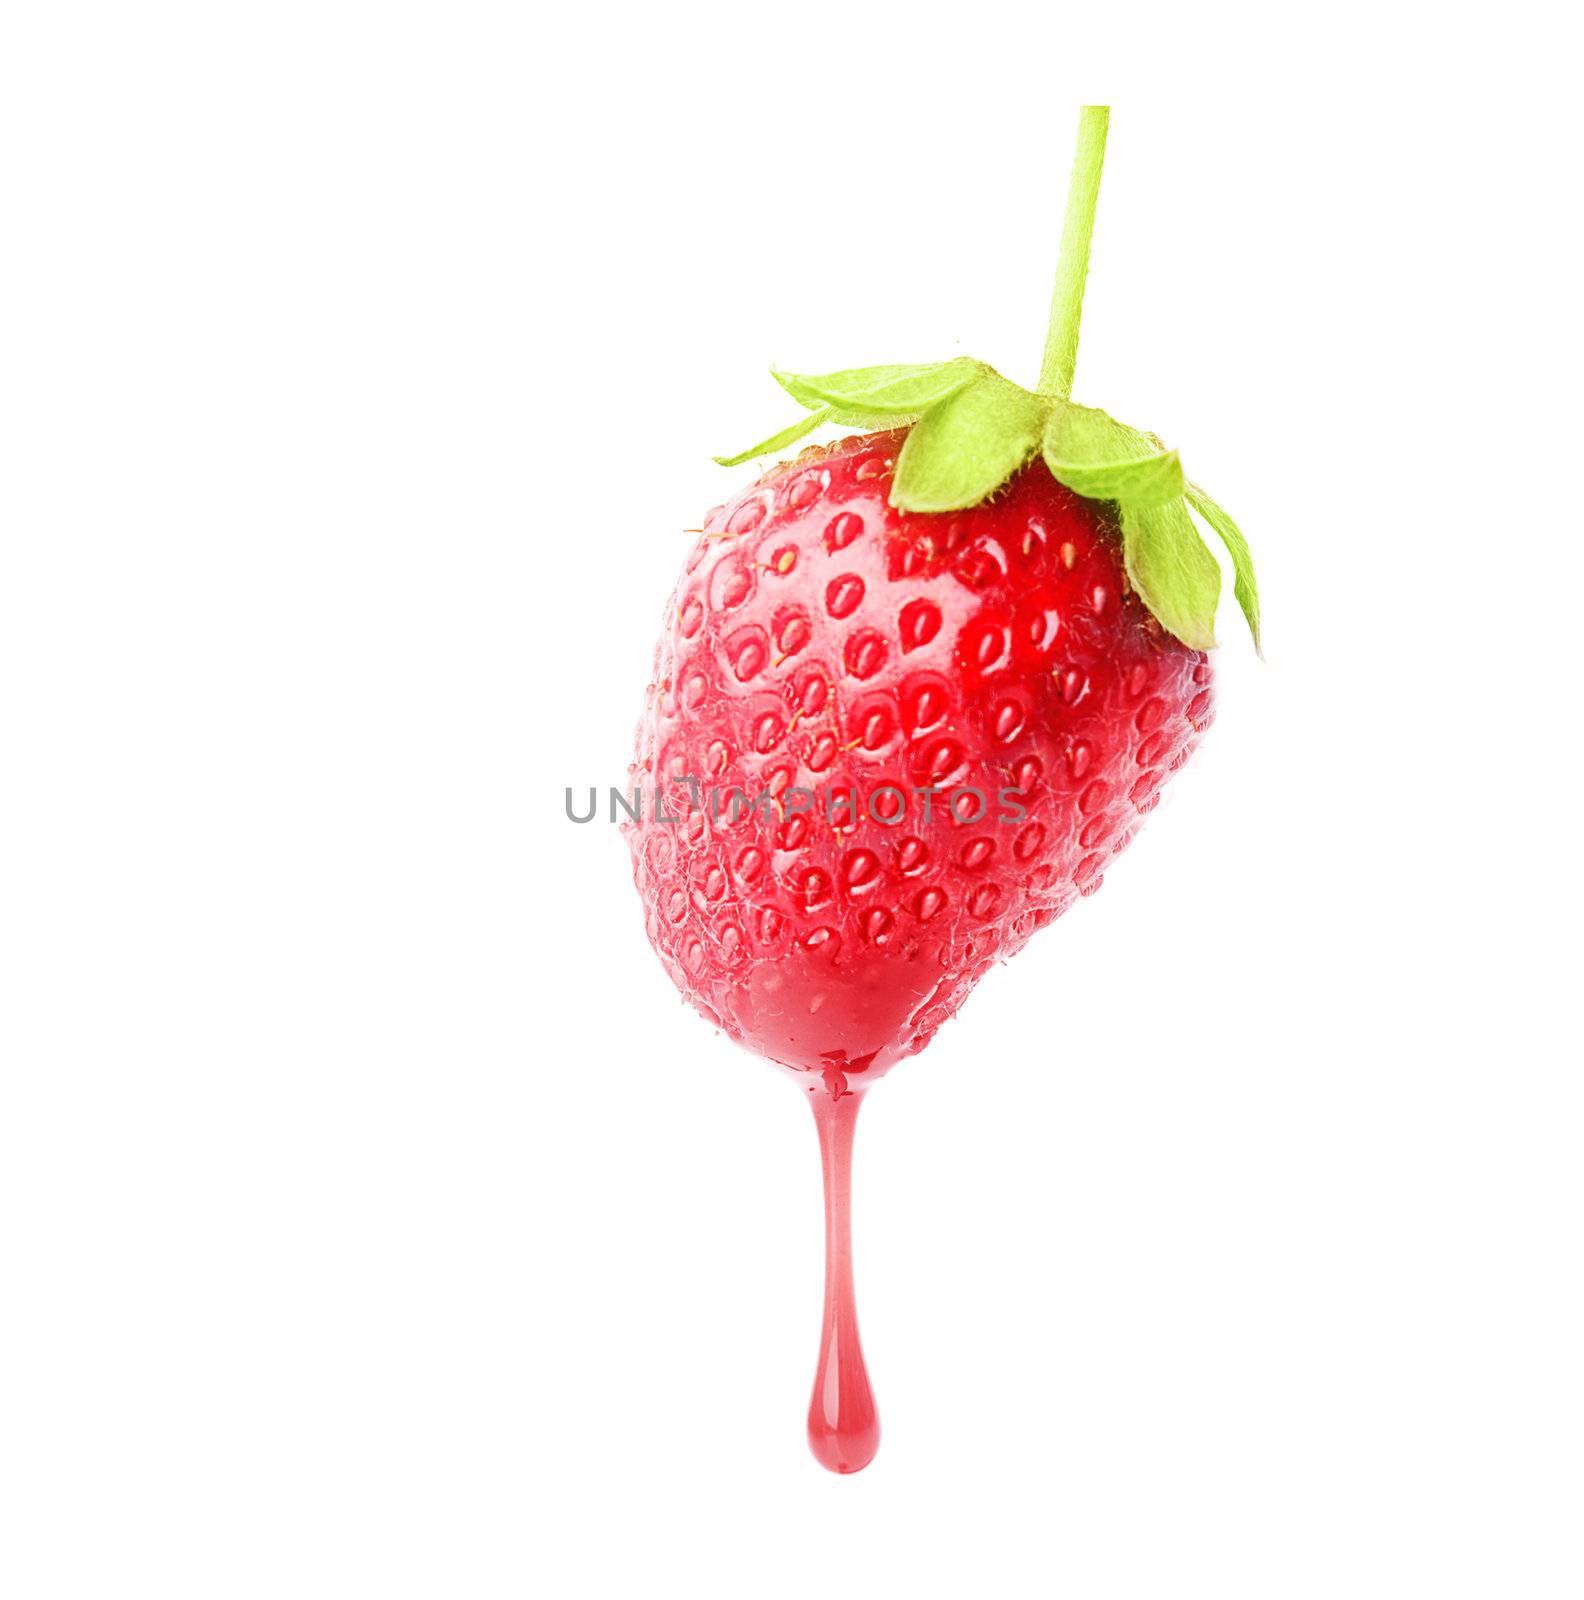 A making strawberry syrup concept on white